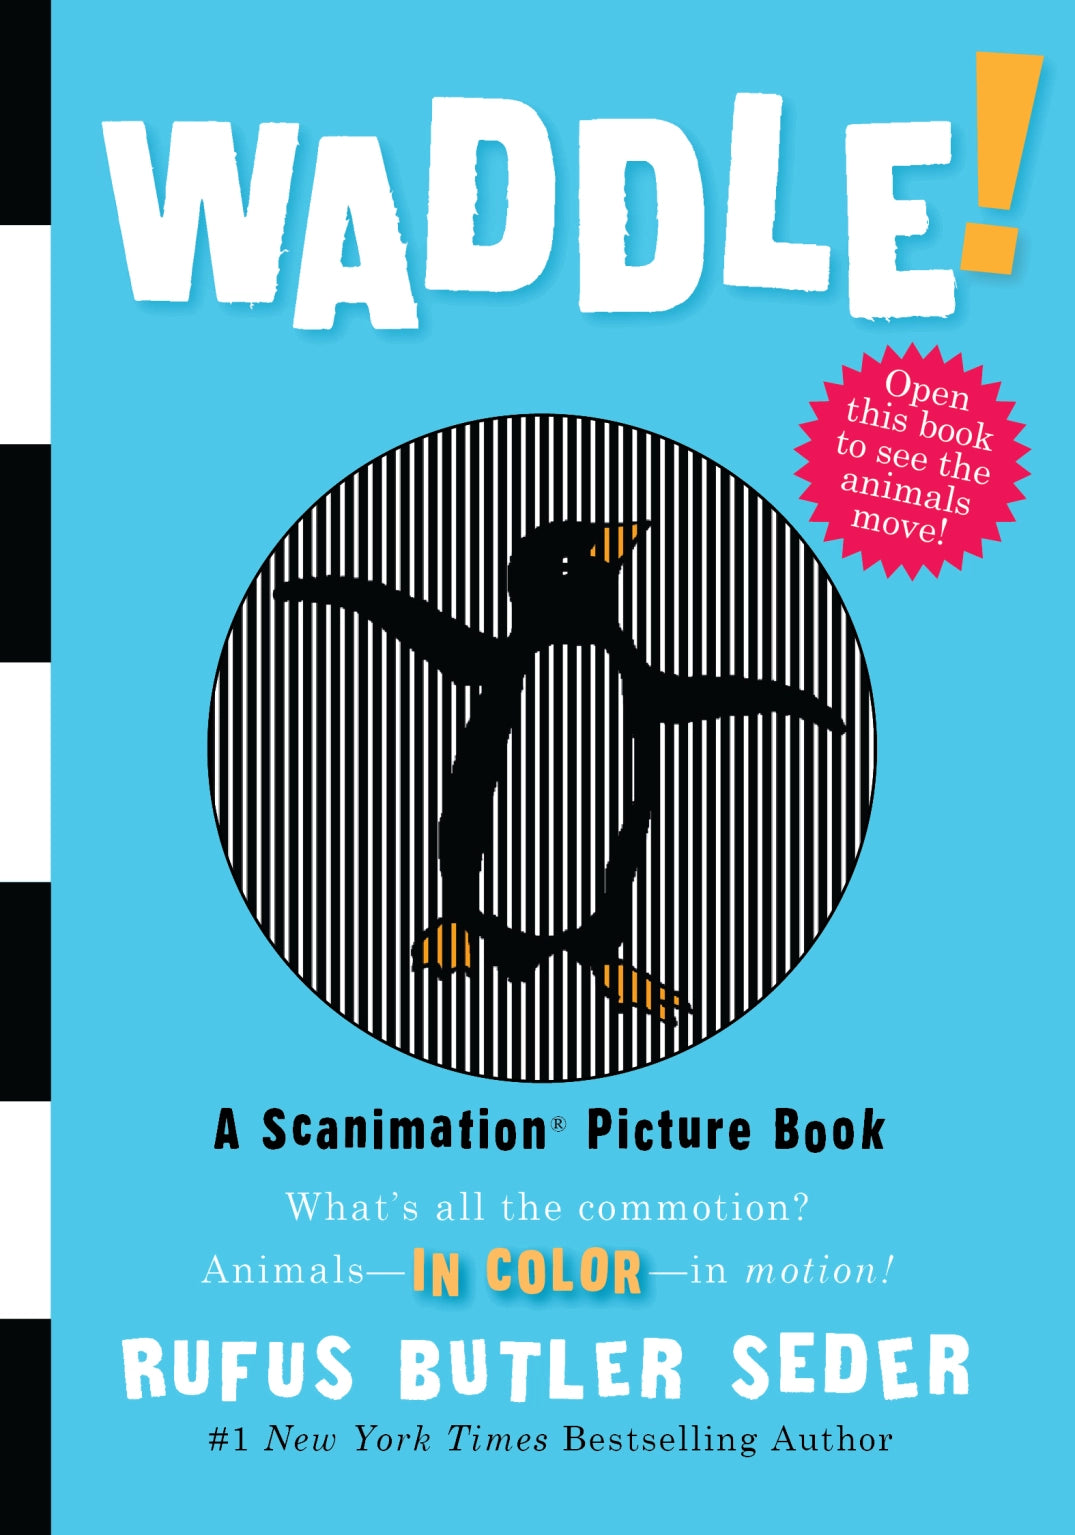 Workman Waddle: A Scanimation Picture Book by Rufus Butler Seder |Mockingbird Baby & Kids